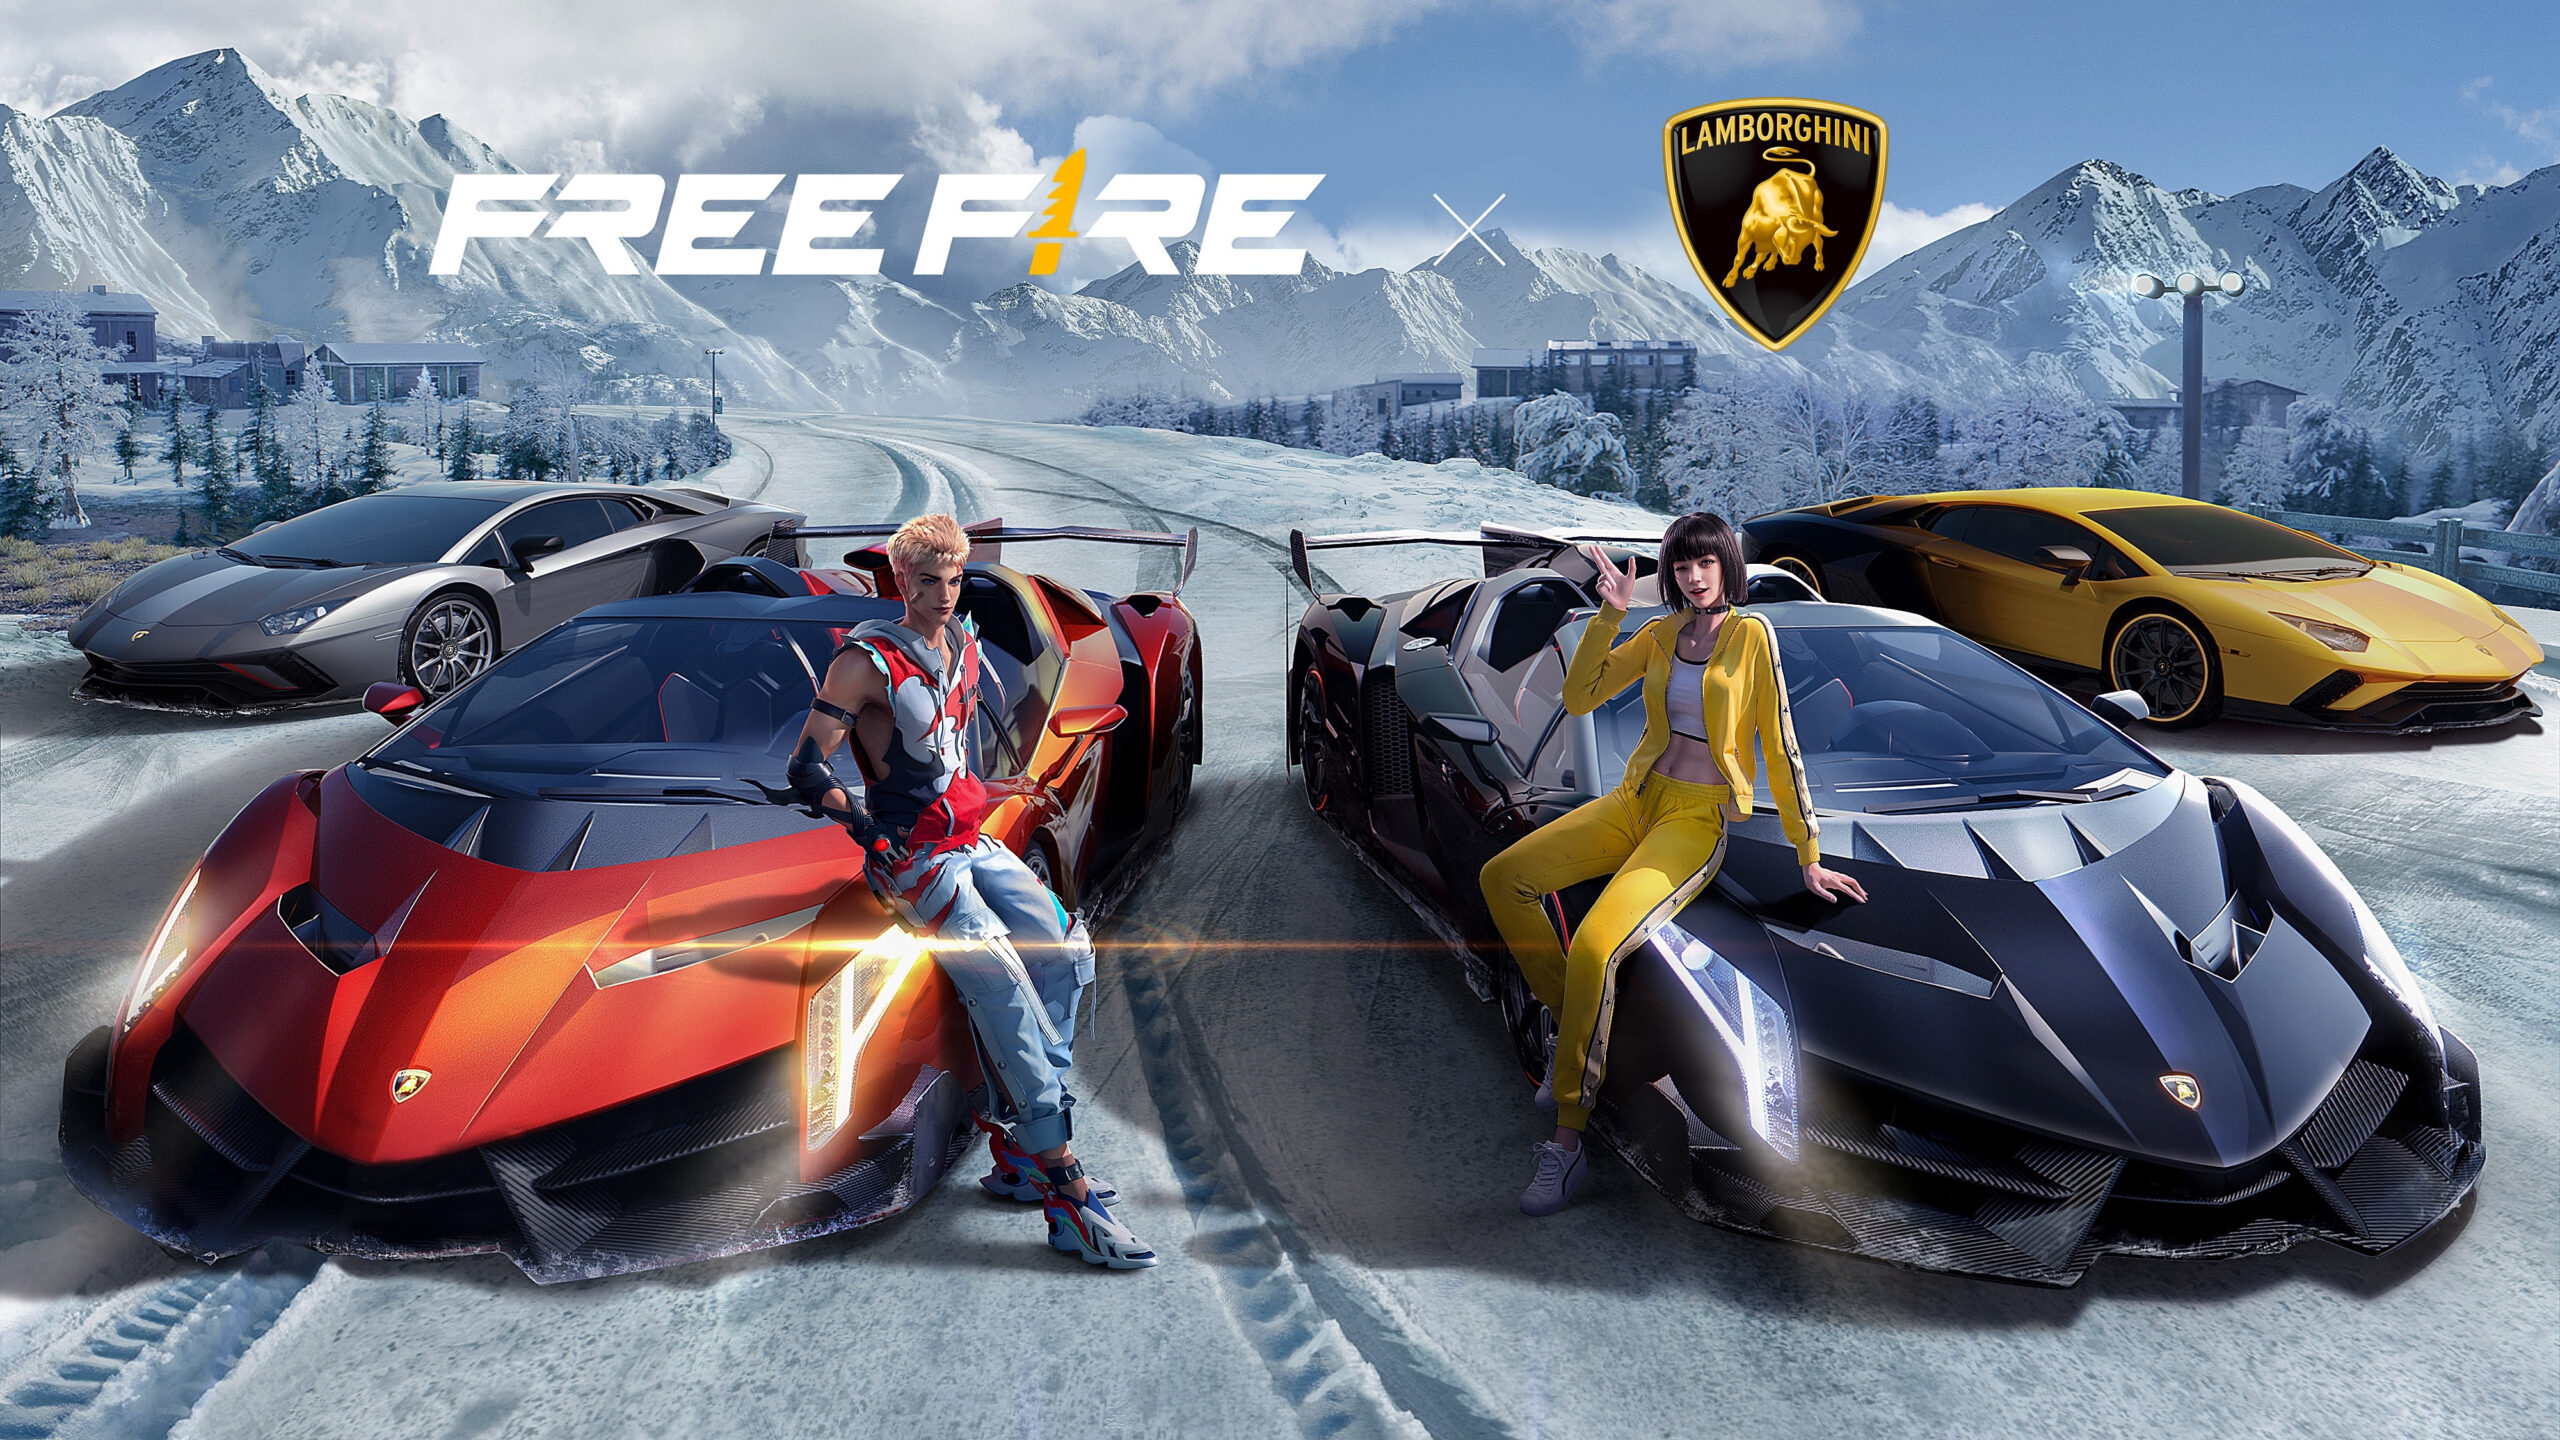 Asphalt 9 China New Update  New Diamond League In multiplayer and